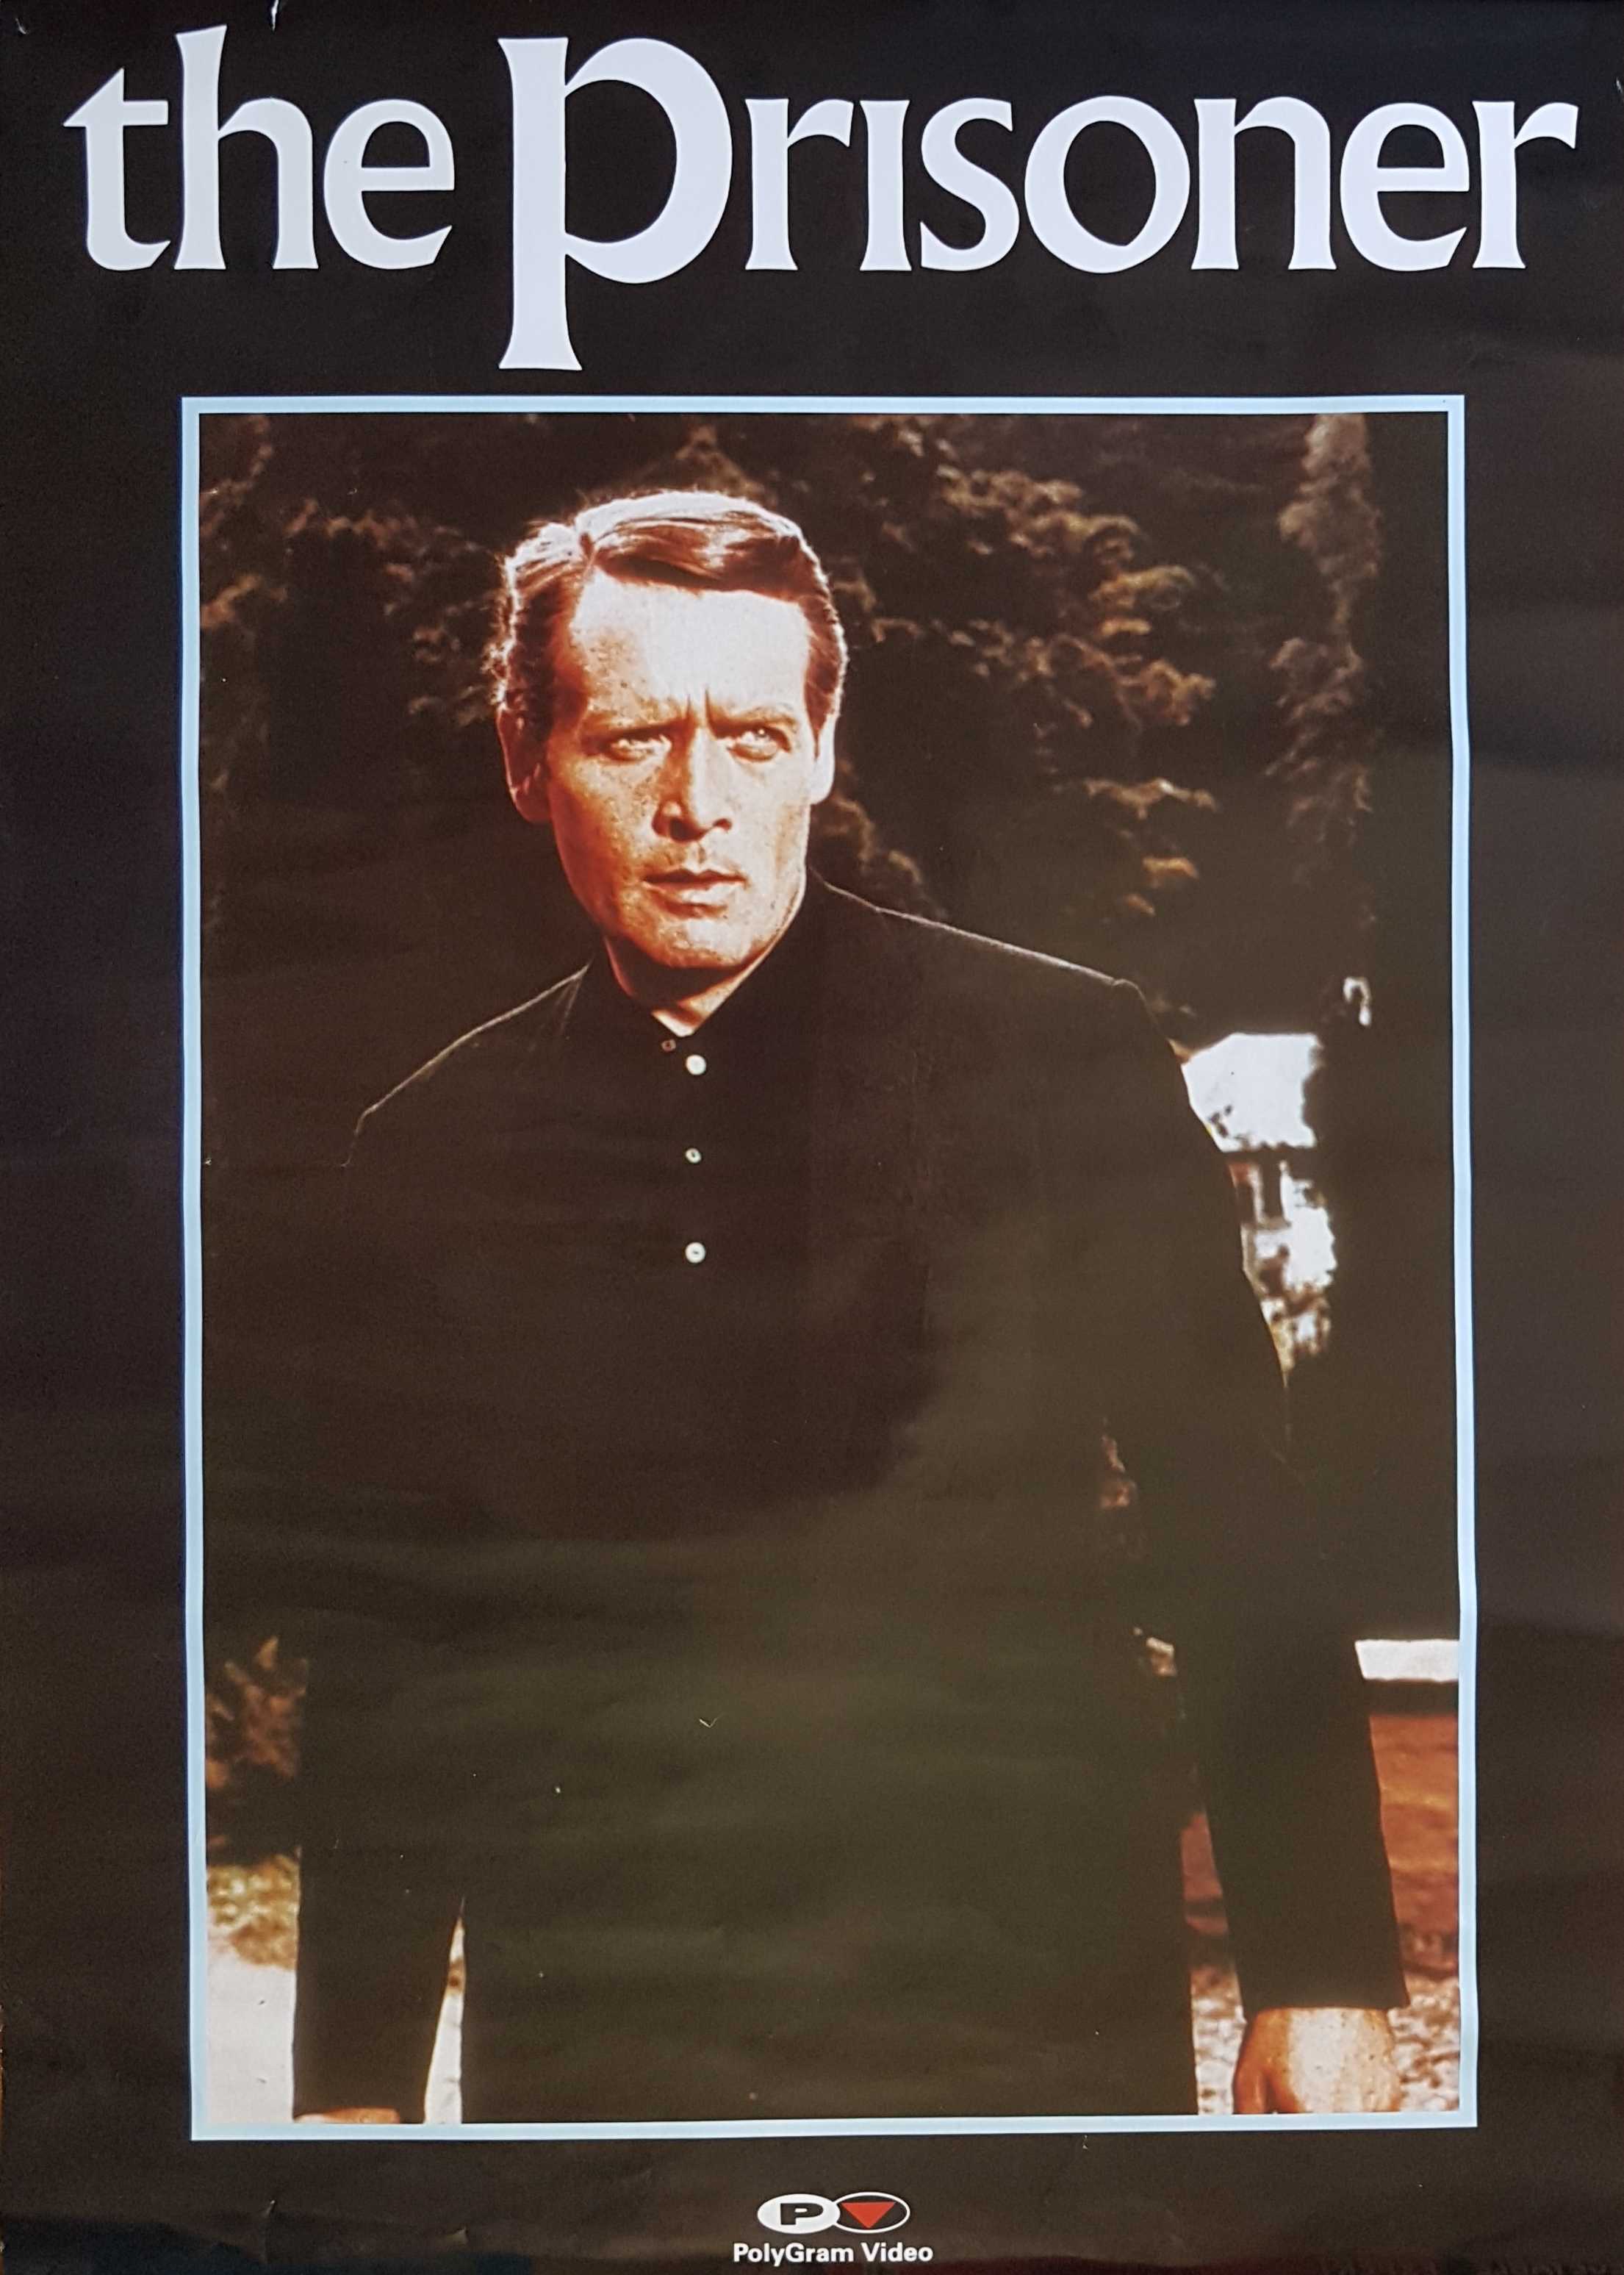 Picture of Poster-TP-Vid2 The Prisoner - Polygram Video by artist Unknown from ITV, Channel 4 and Channel 5 library